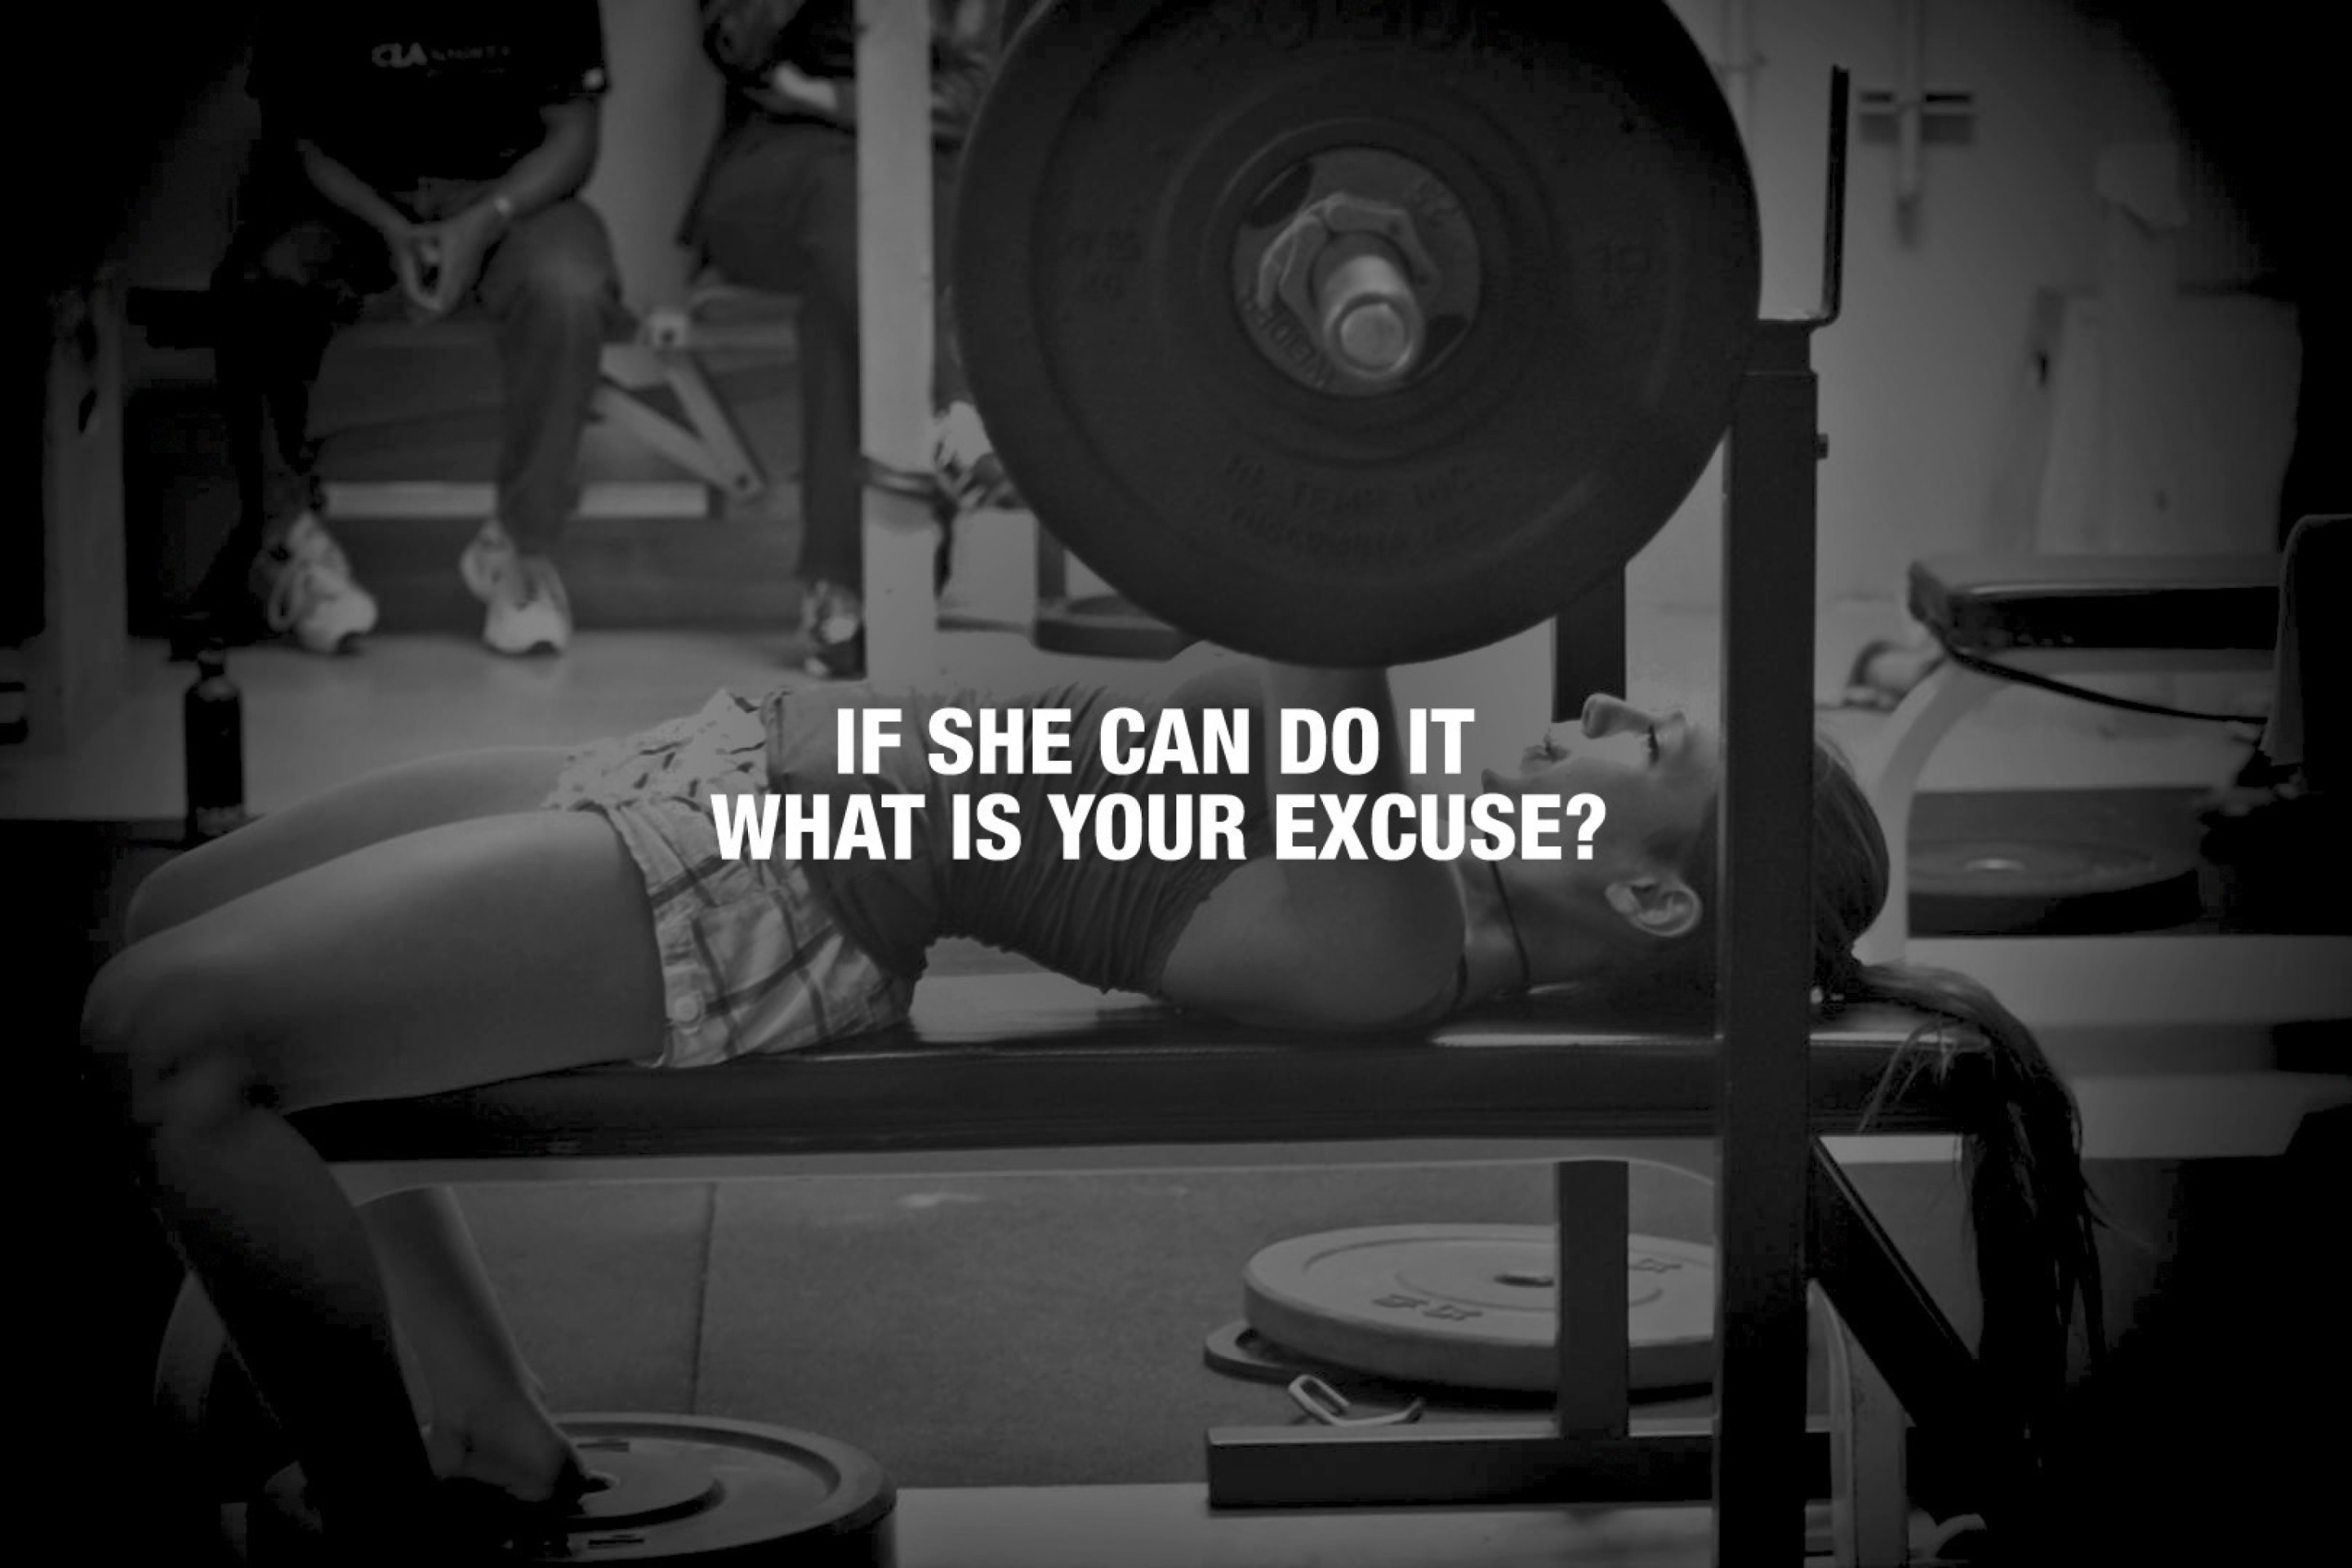 Das If She Can Do It What Is Your Excuse? Wallpaper 2880x1920